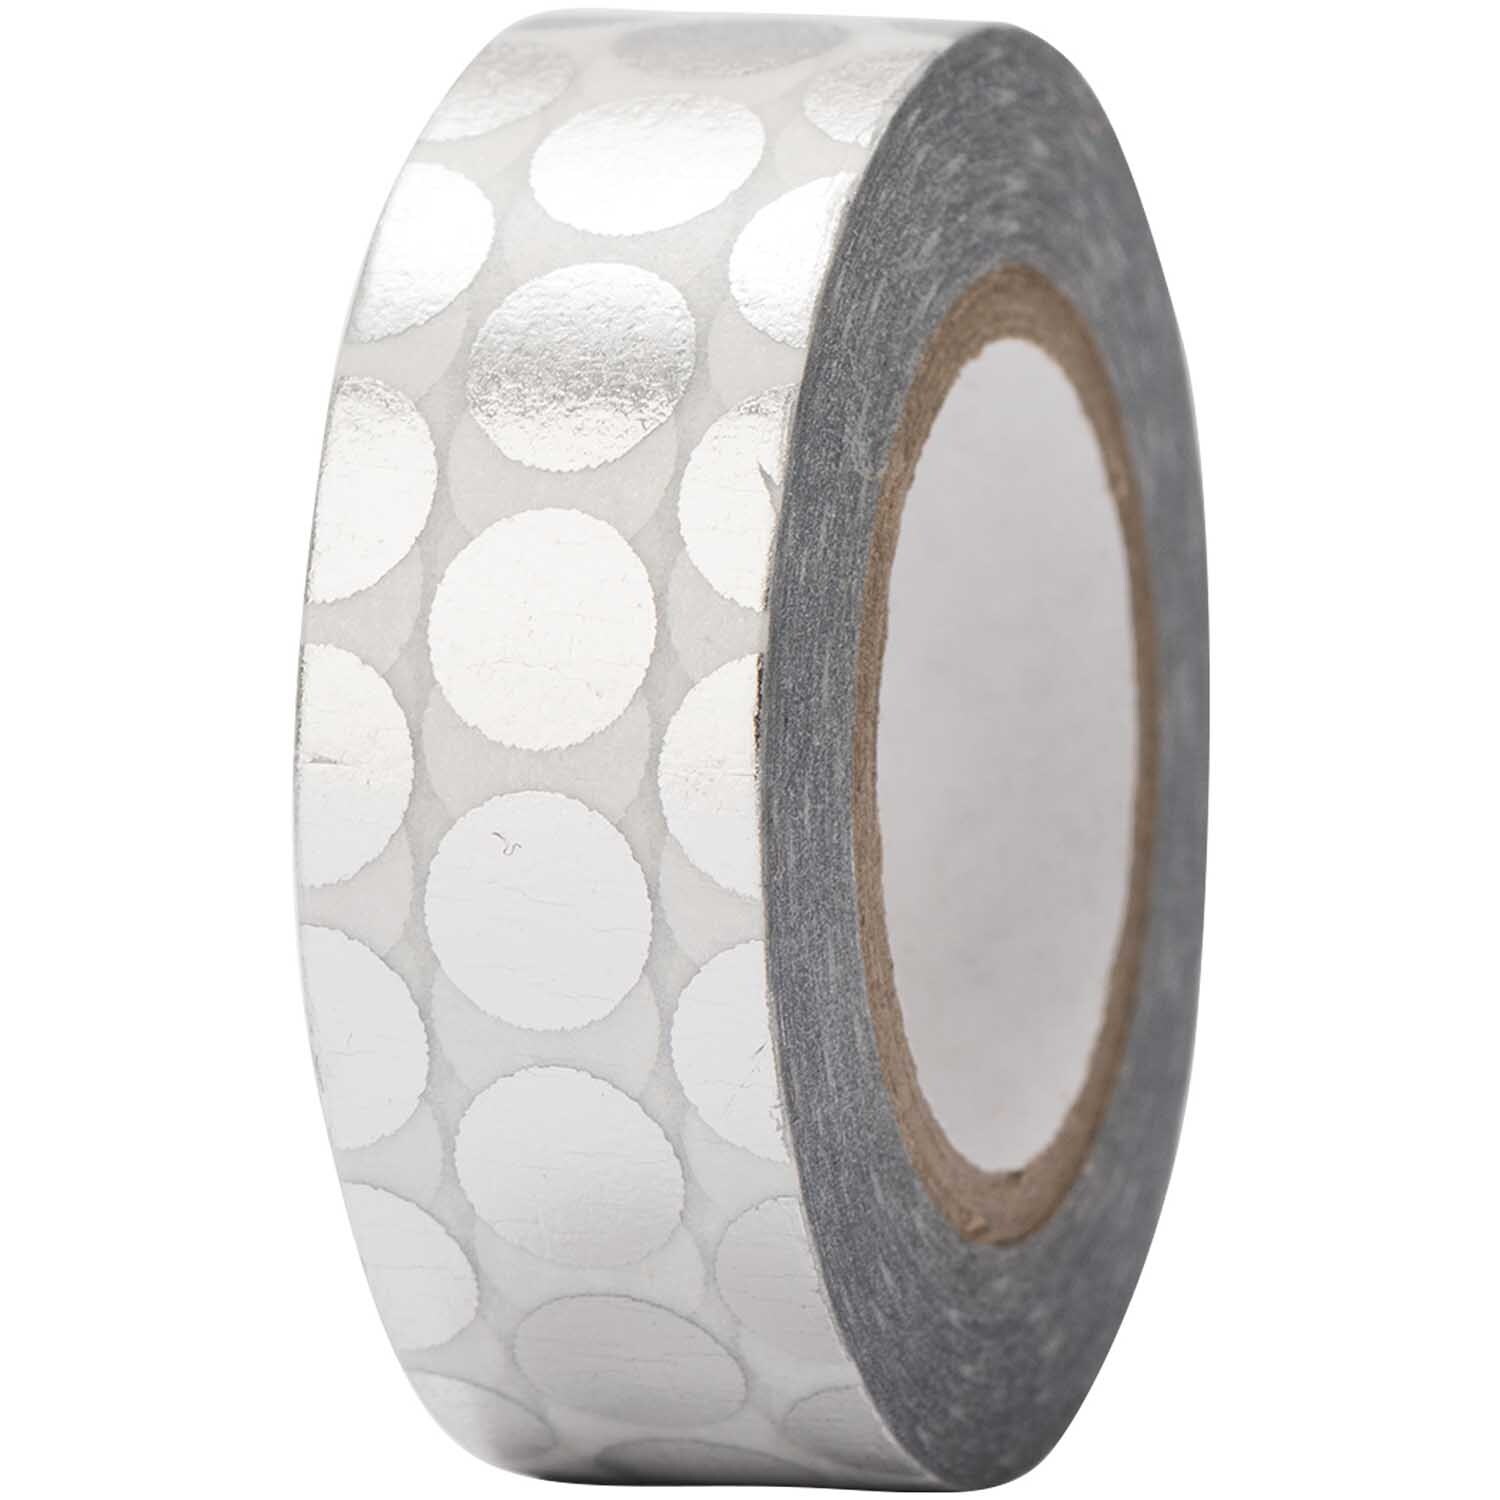 Paper Poetry Tape Punkte silber 15mm 10m Hot Foil